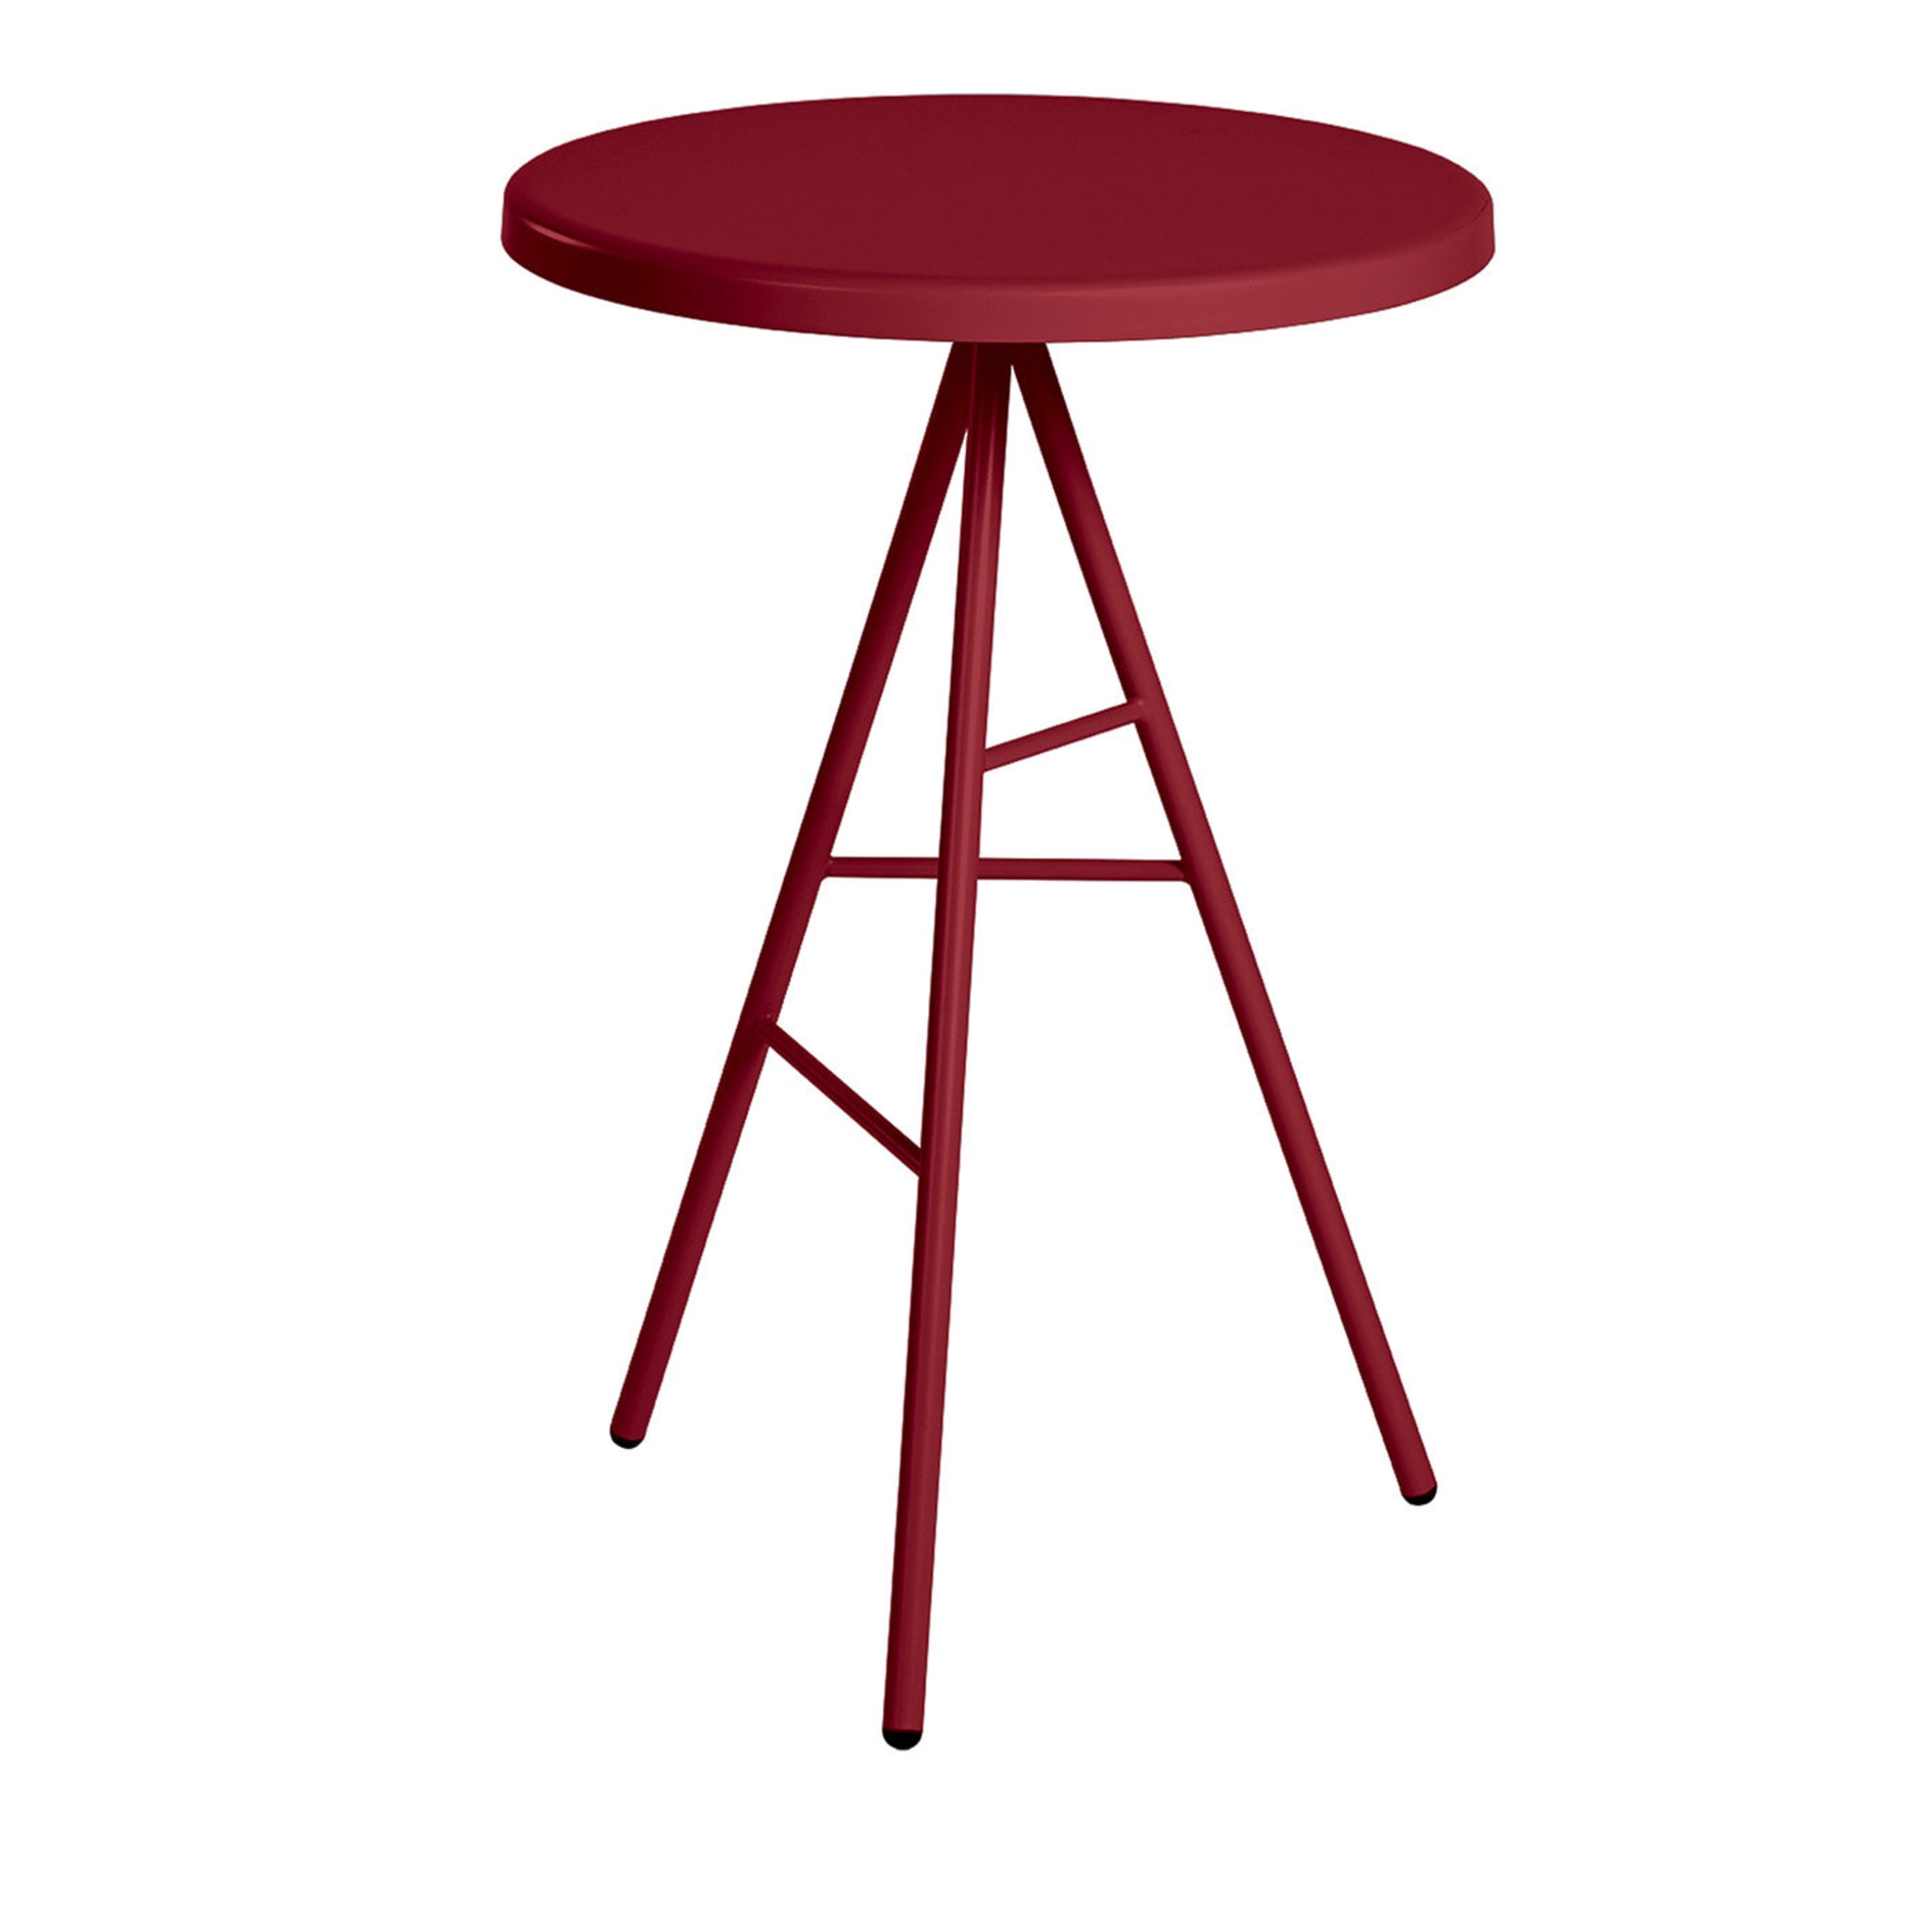 Table d'appoint Symple Medium Red - Vue principale